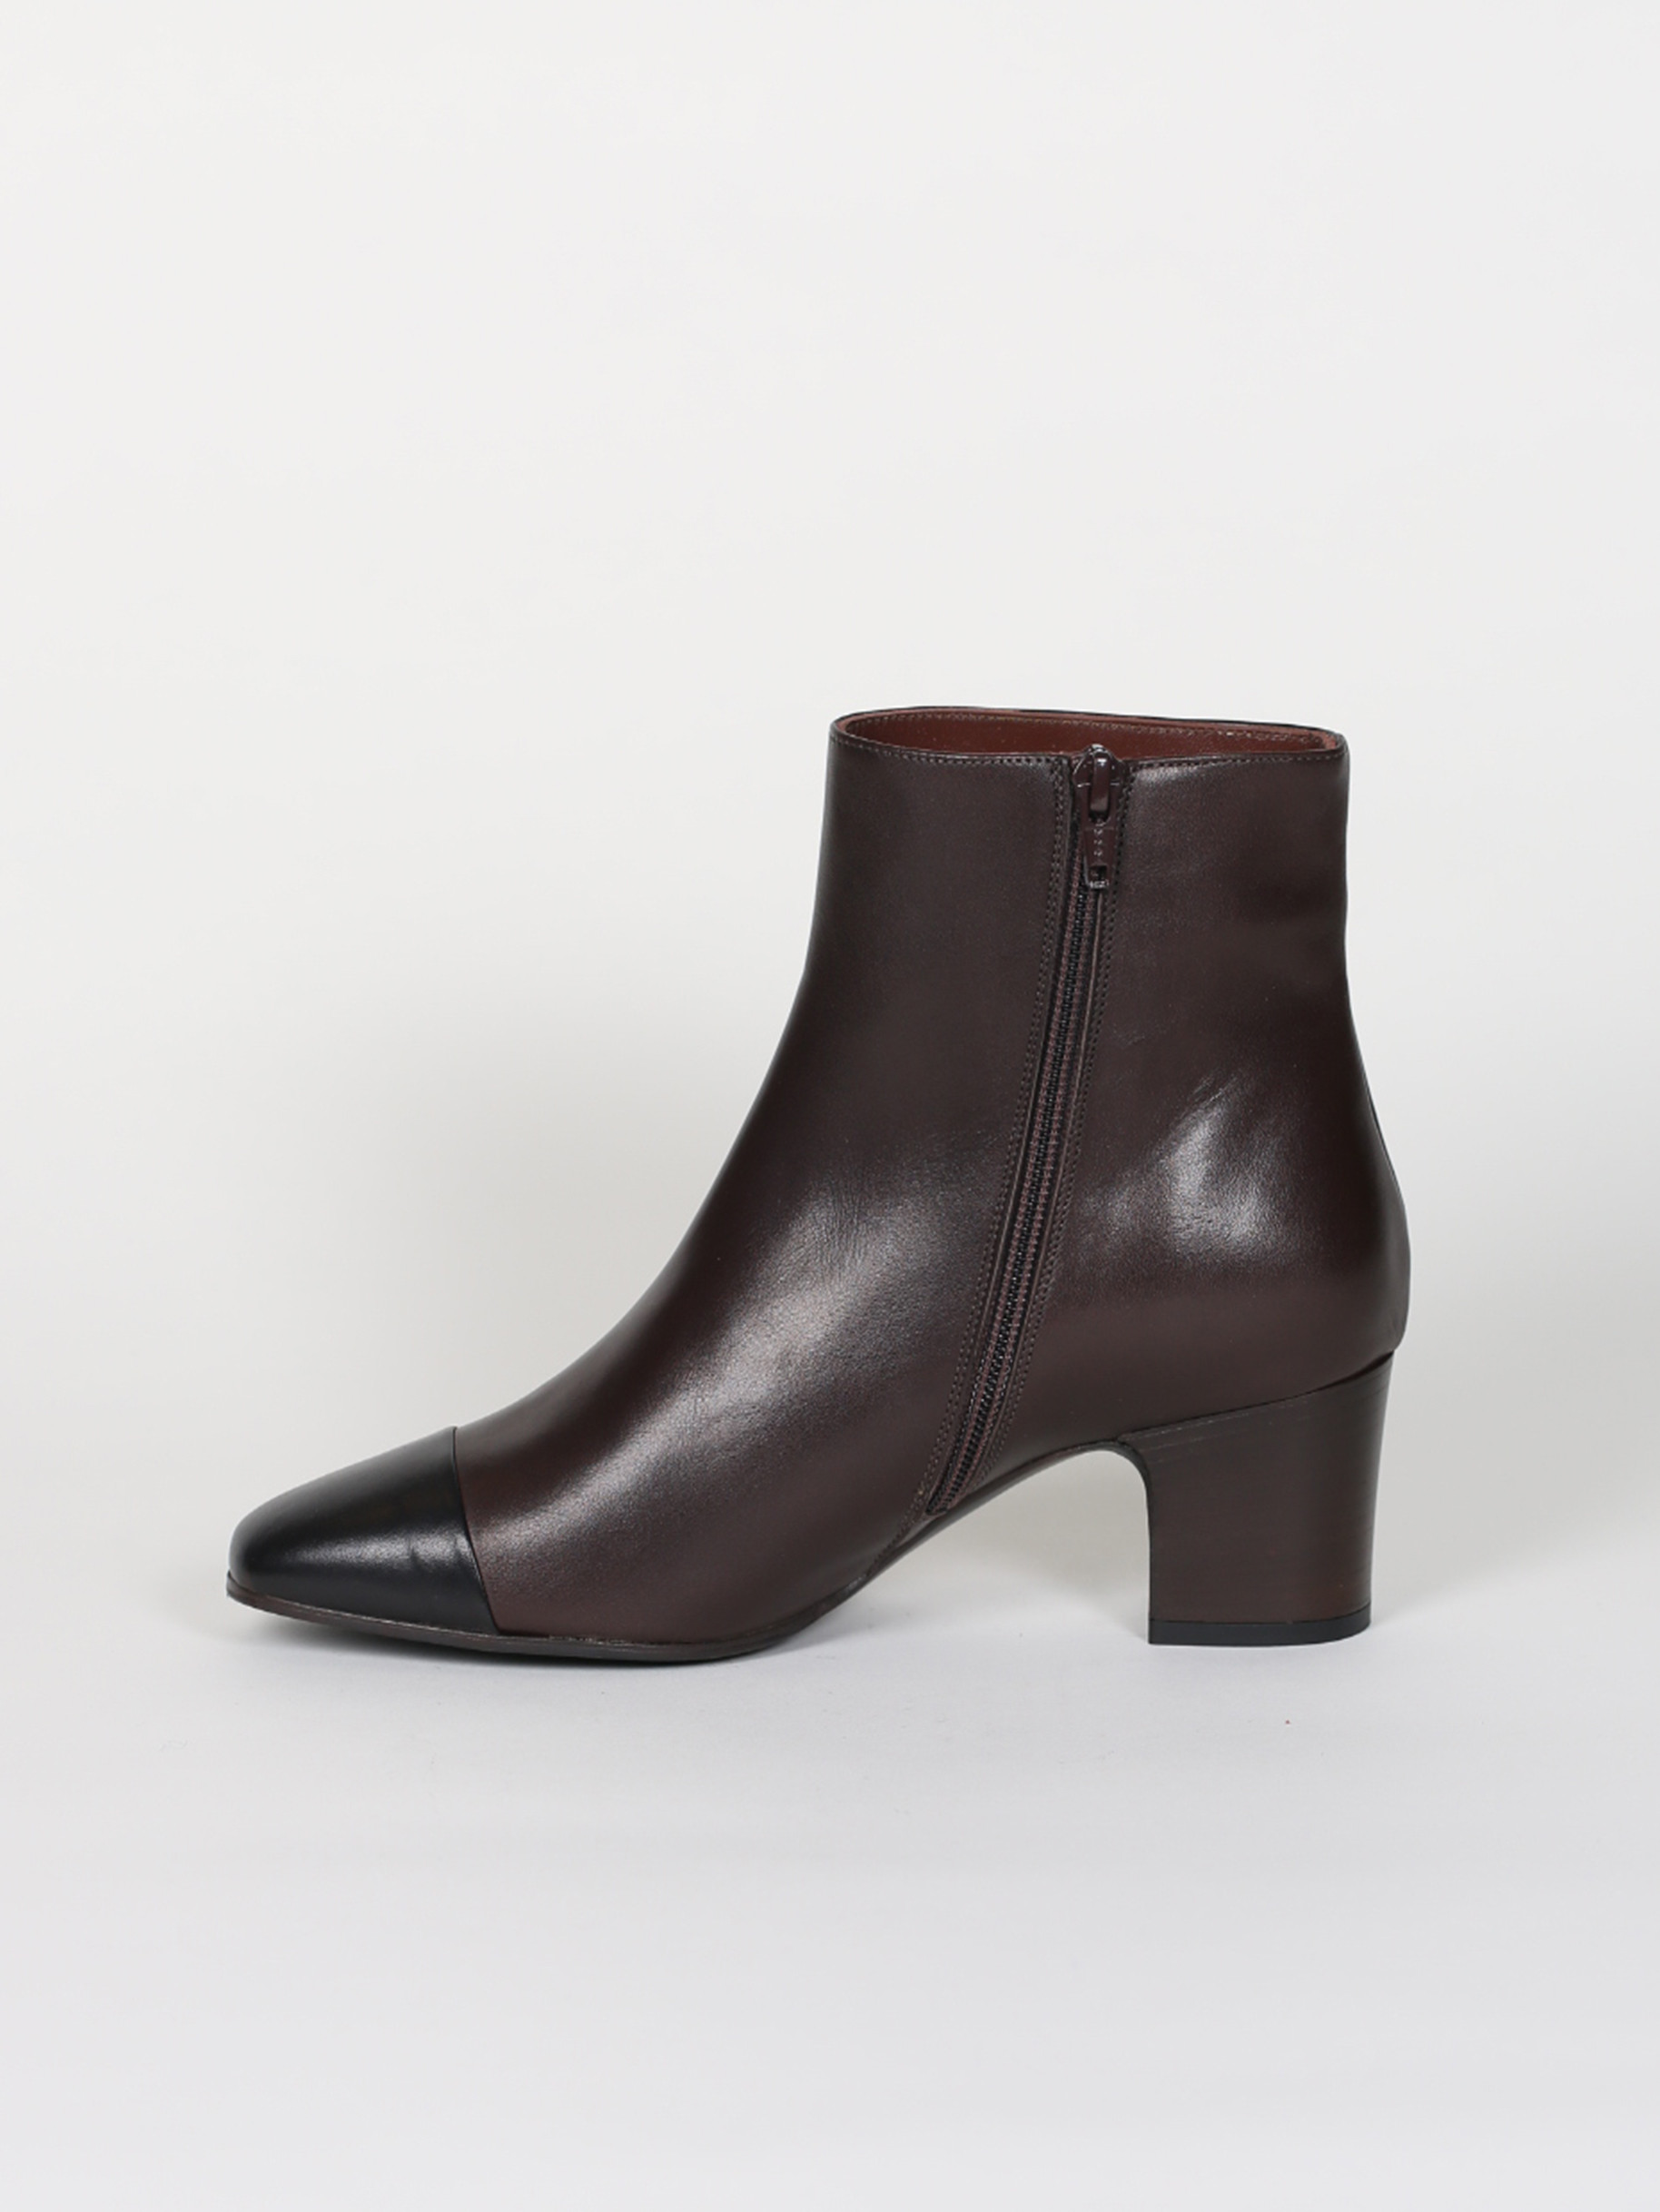 Black and brown leather low boots